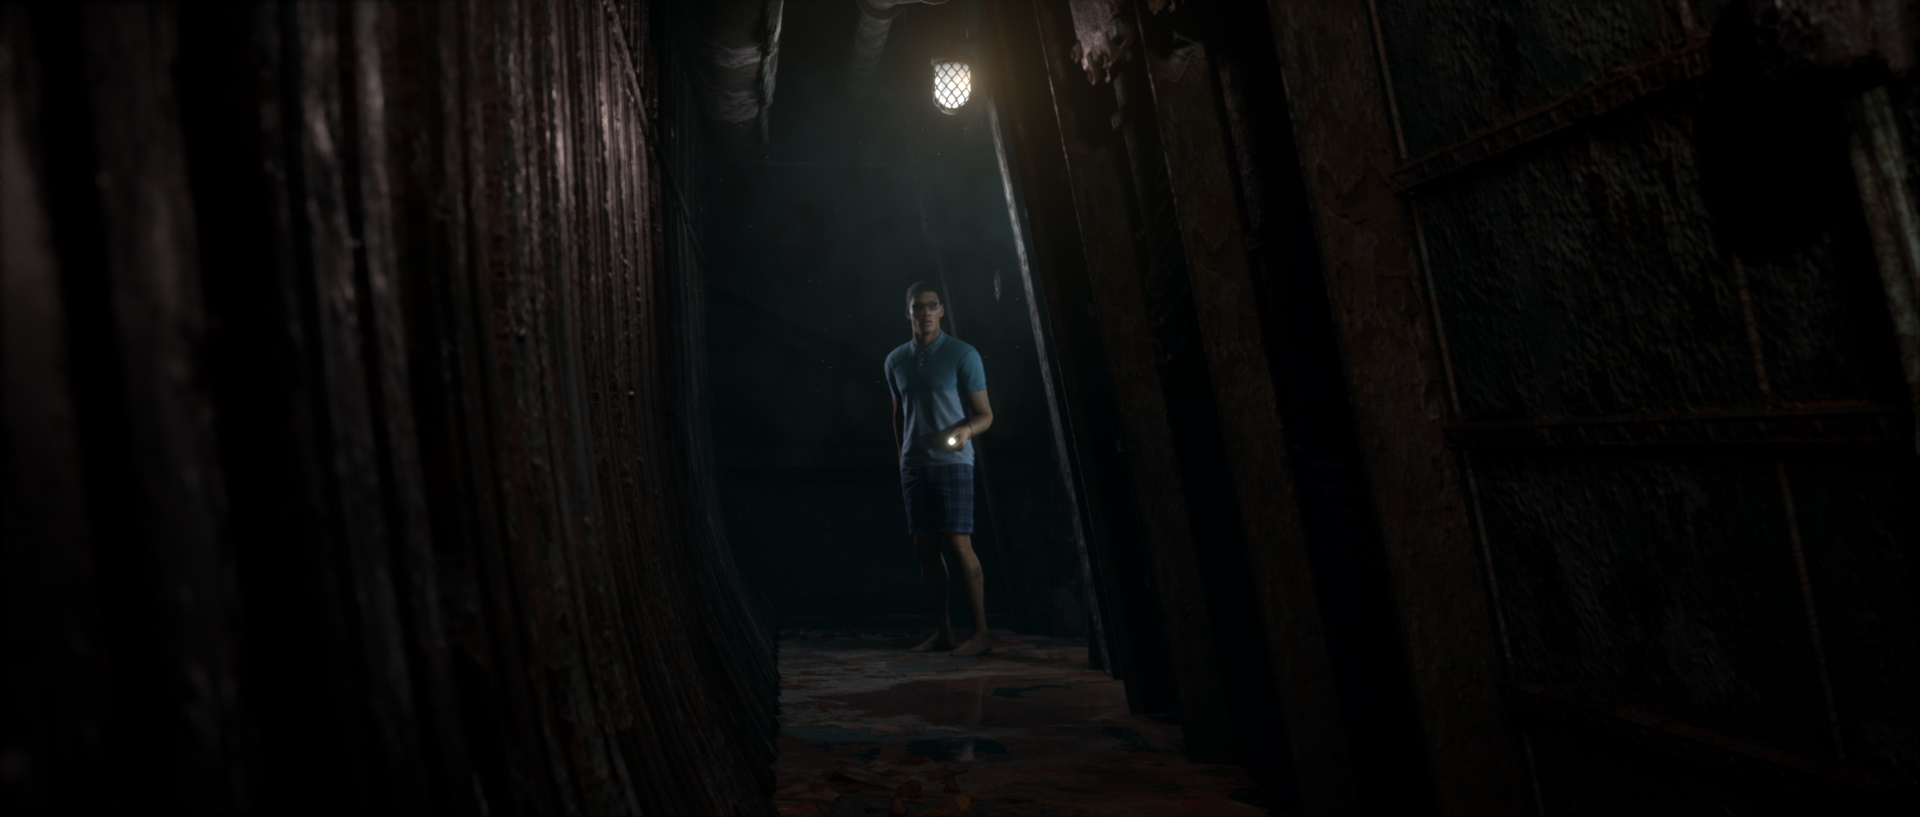 A screenshot from The Dark Pictures: Man of Medan on PS4